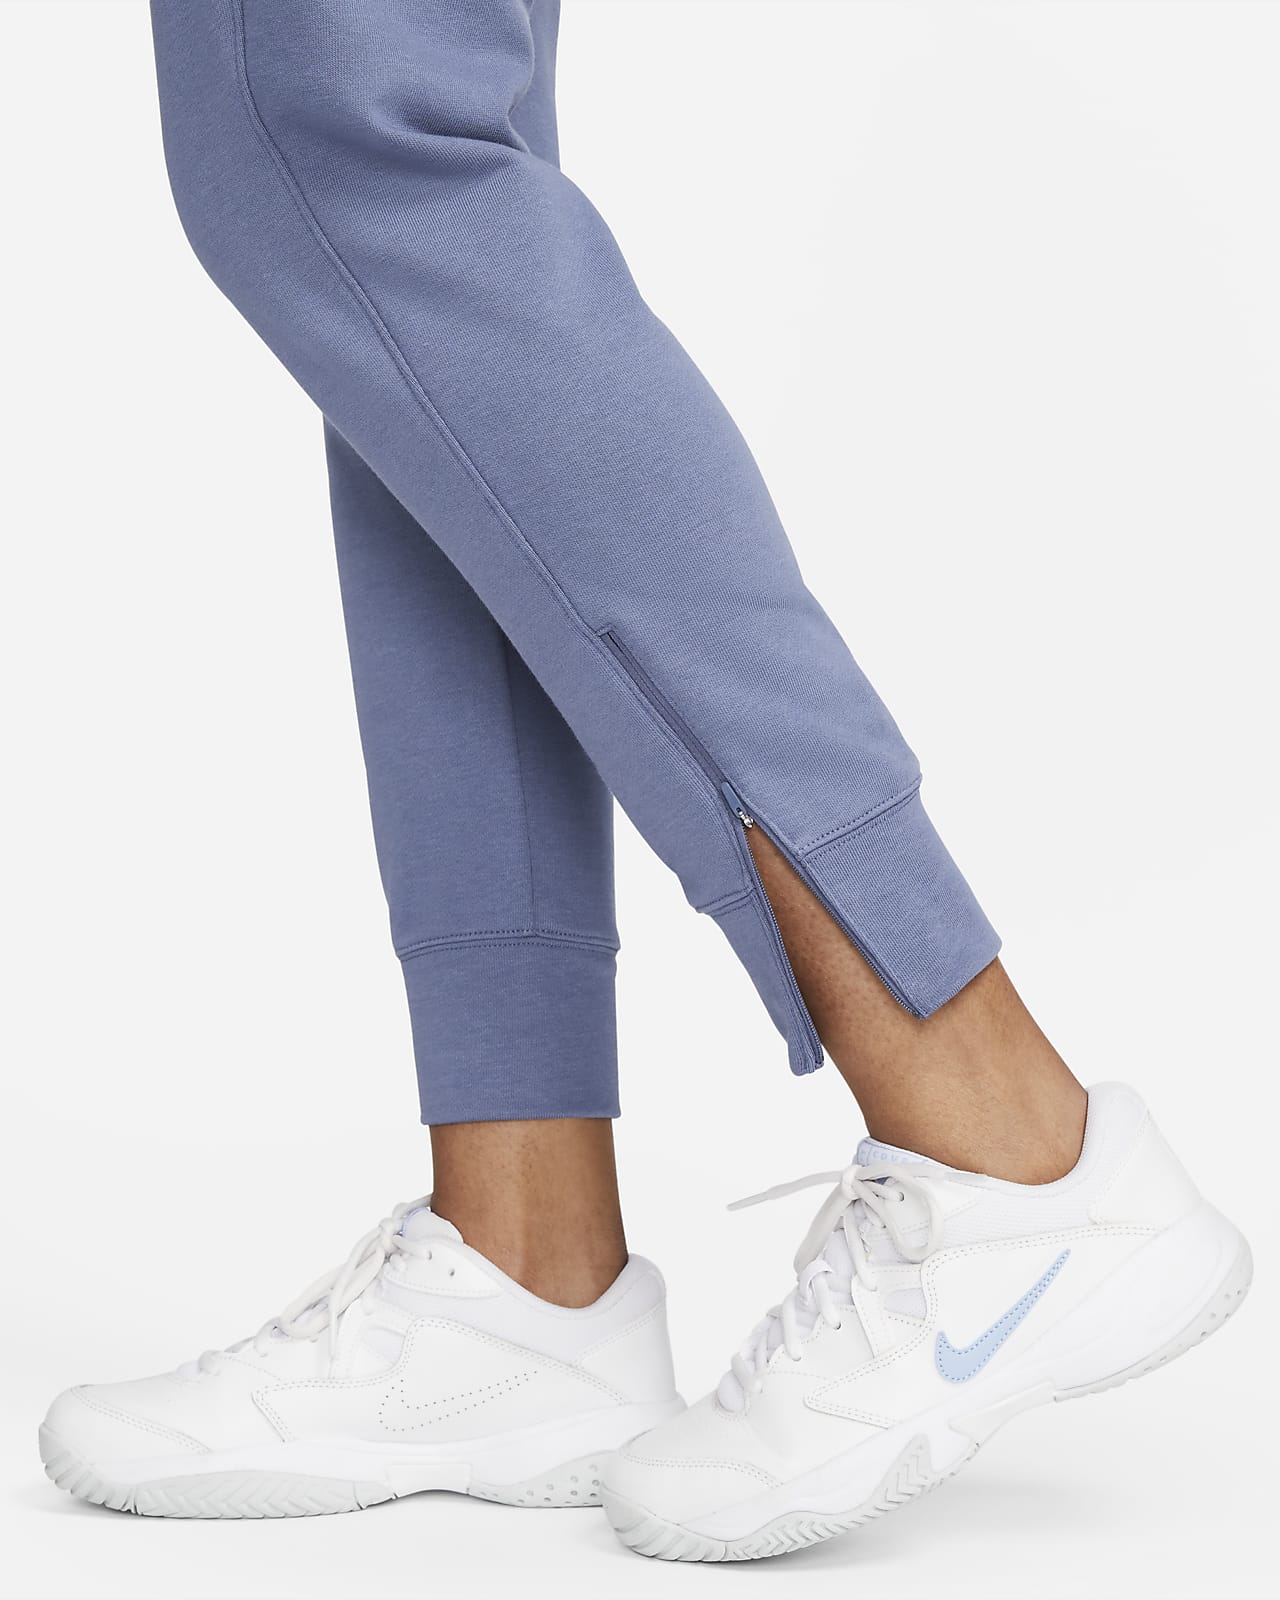 Men's trousers Nike Court Heritage Suit Pant M - binary blue/gorge  green/white, Tennis Zone